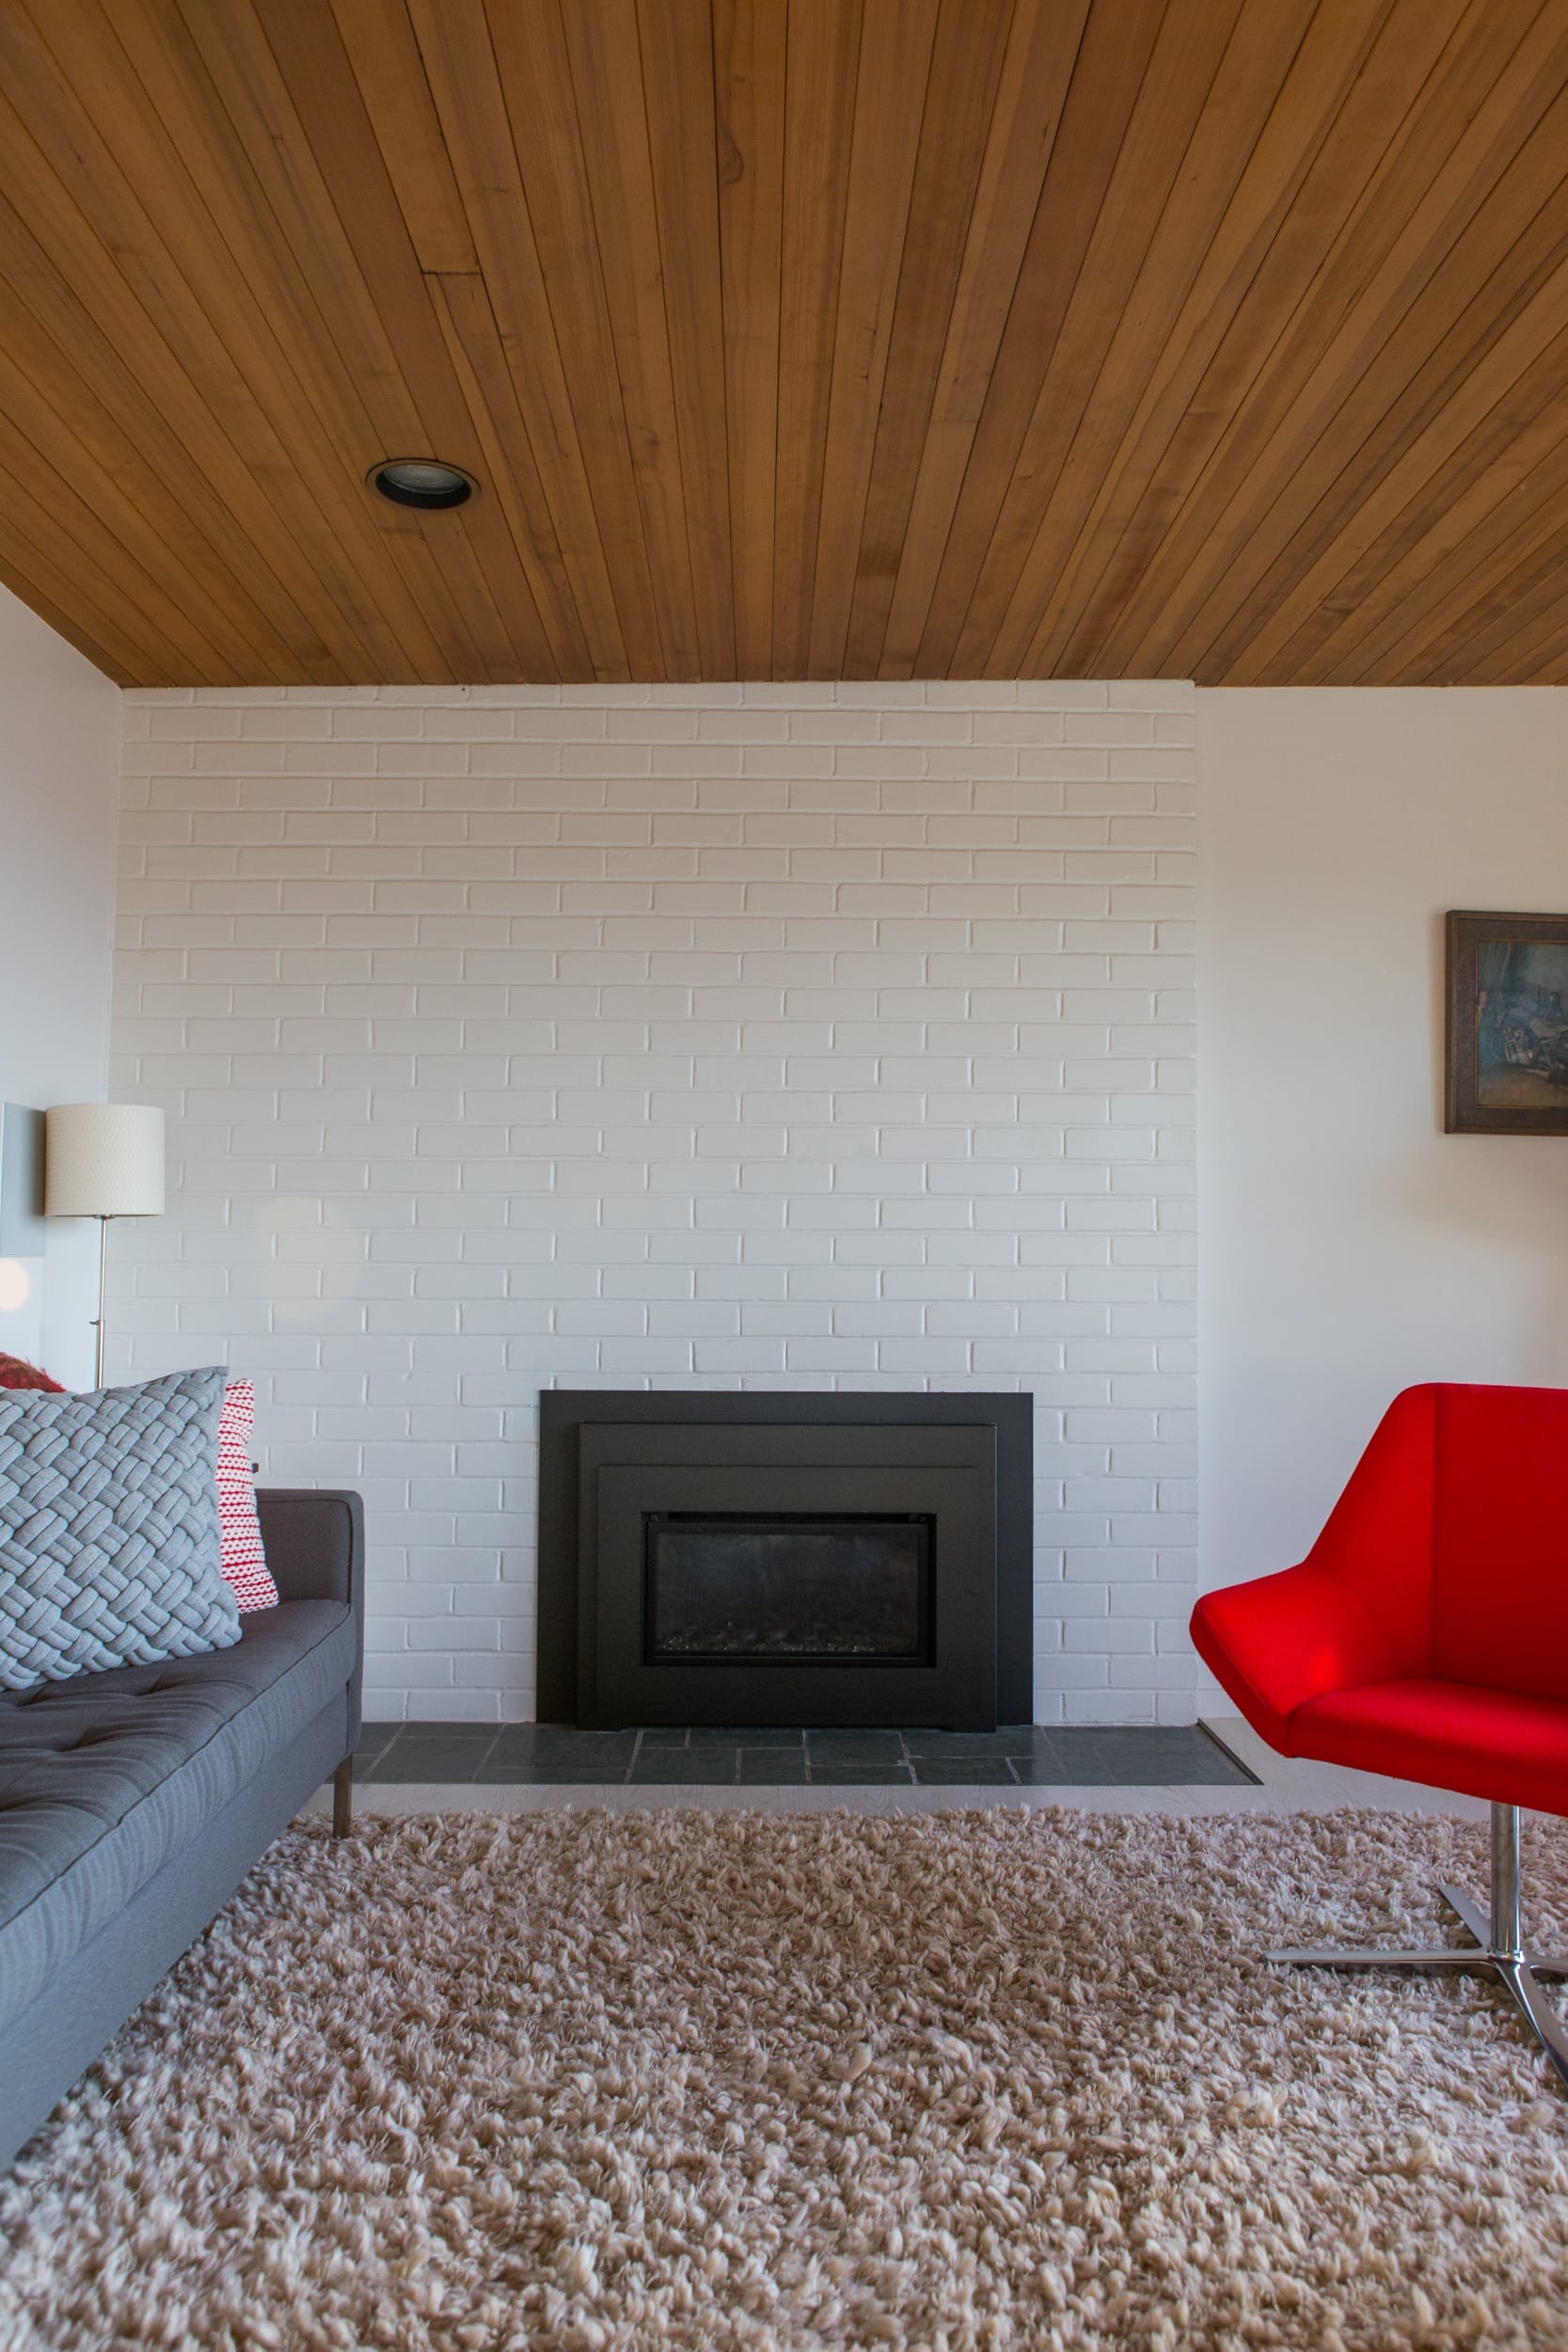 A living room with a wood ceiling and red chair.